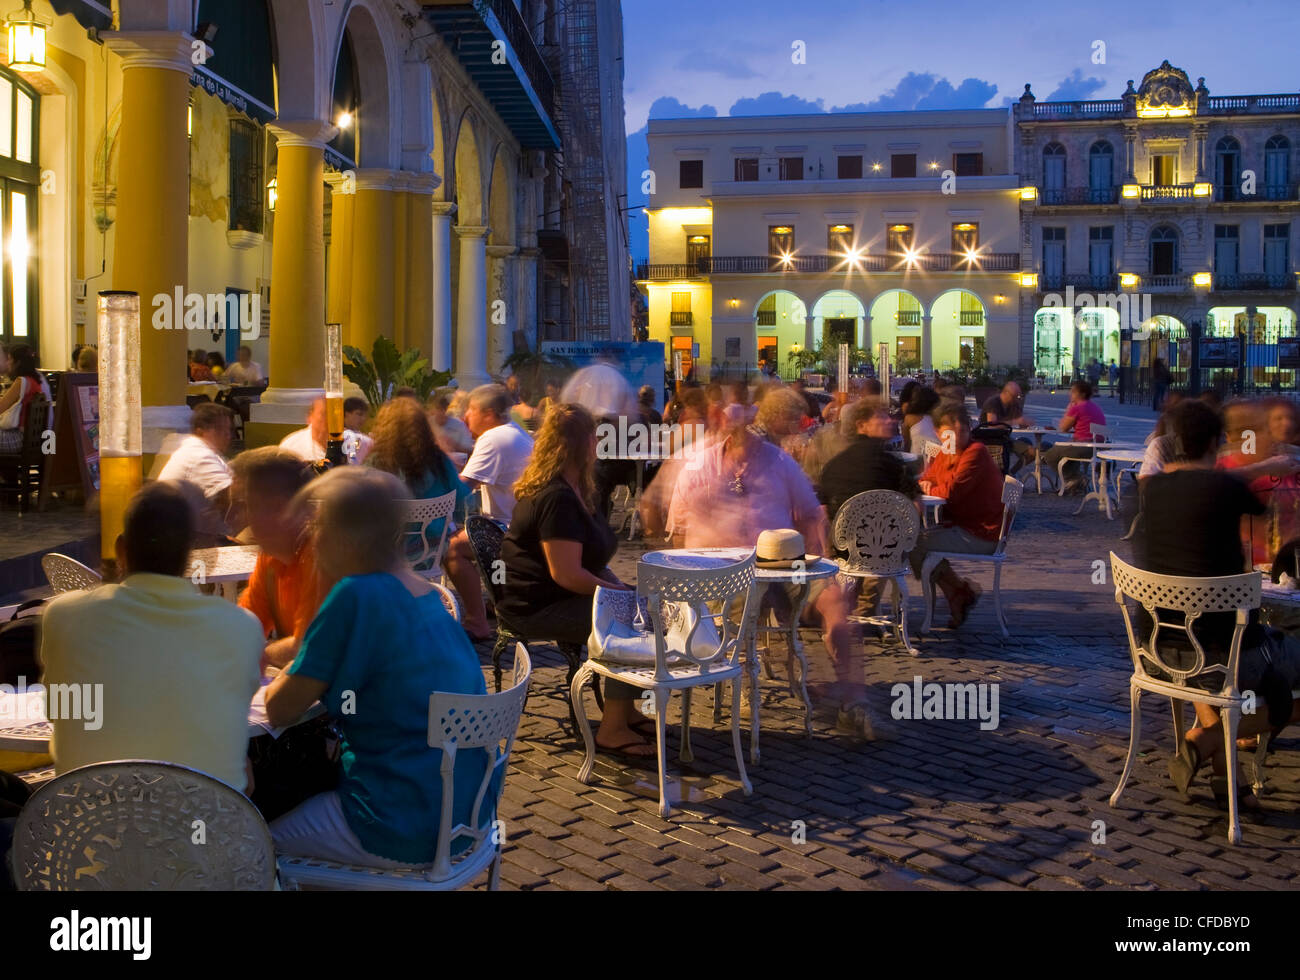 Eating al fresco in the evening, Plaza Vieja, Old Havana, Cuba, West Indies, Central America Stock Photo